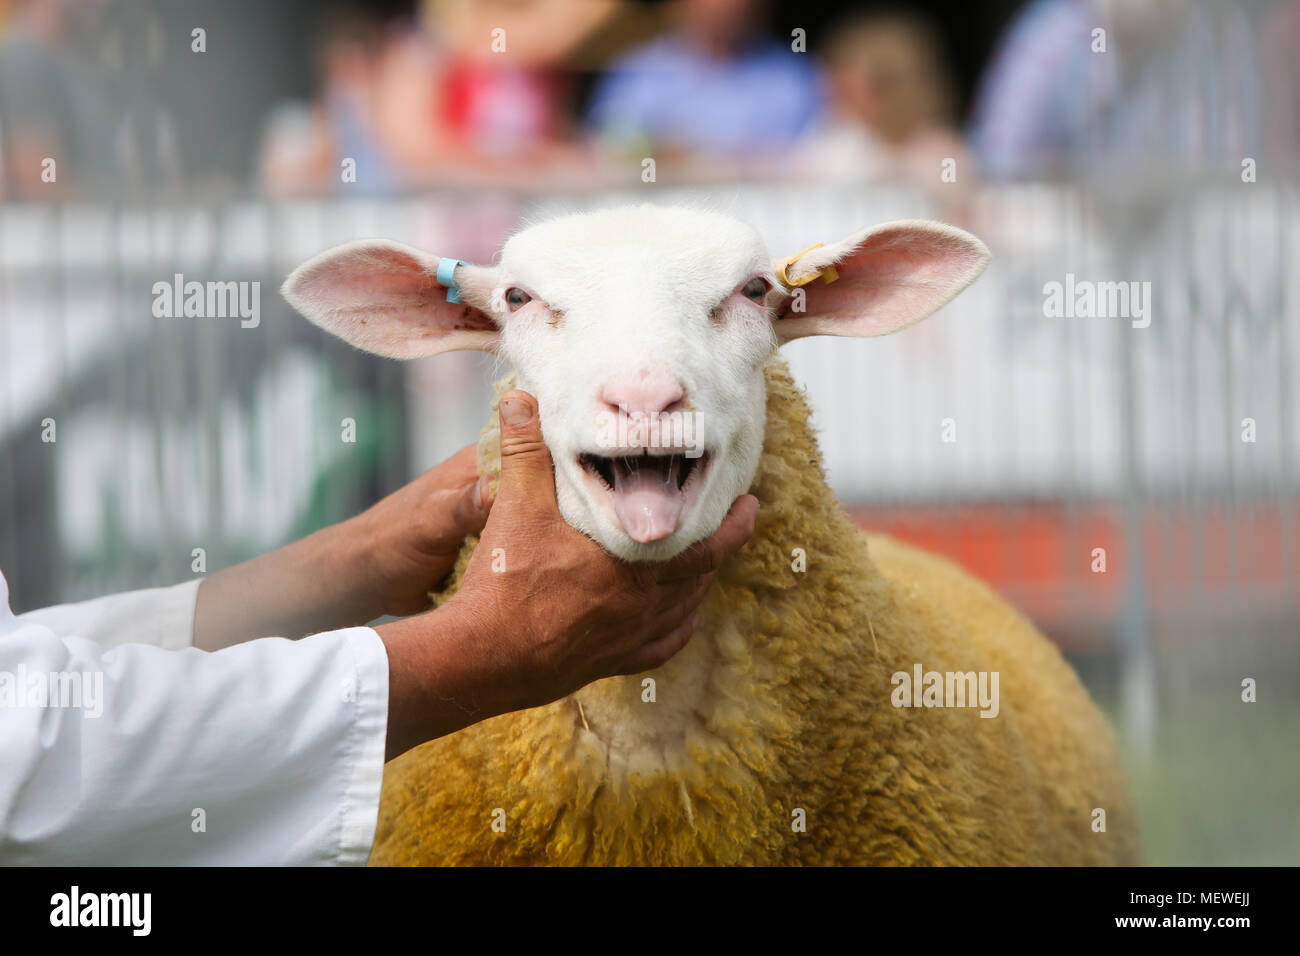 sheep being shown Stock Photo